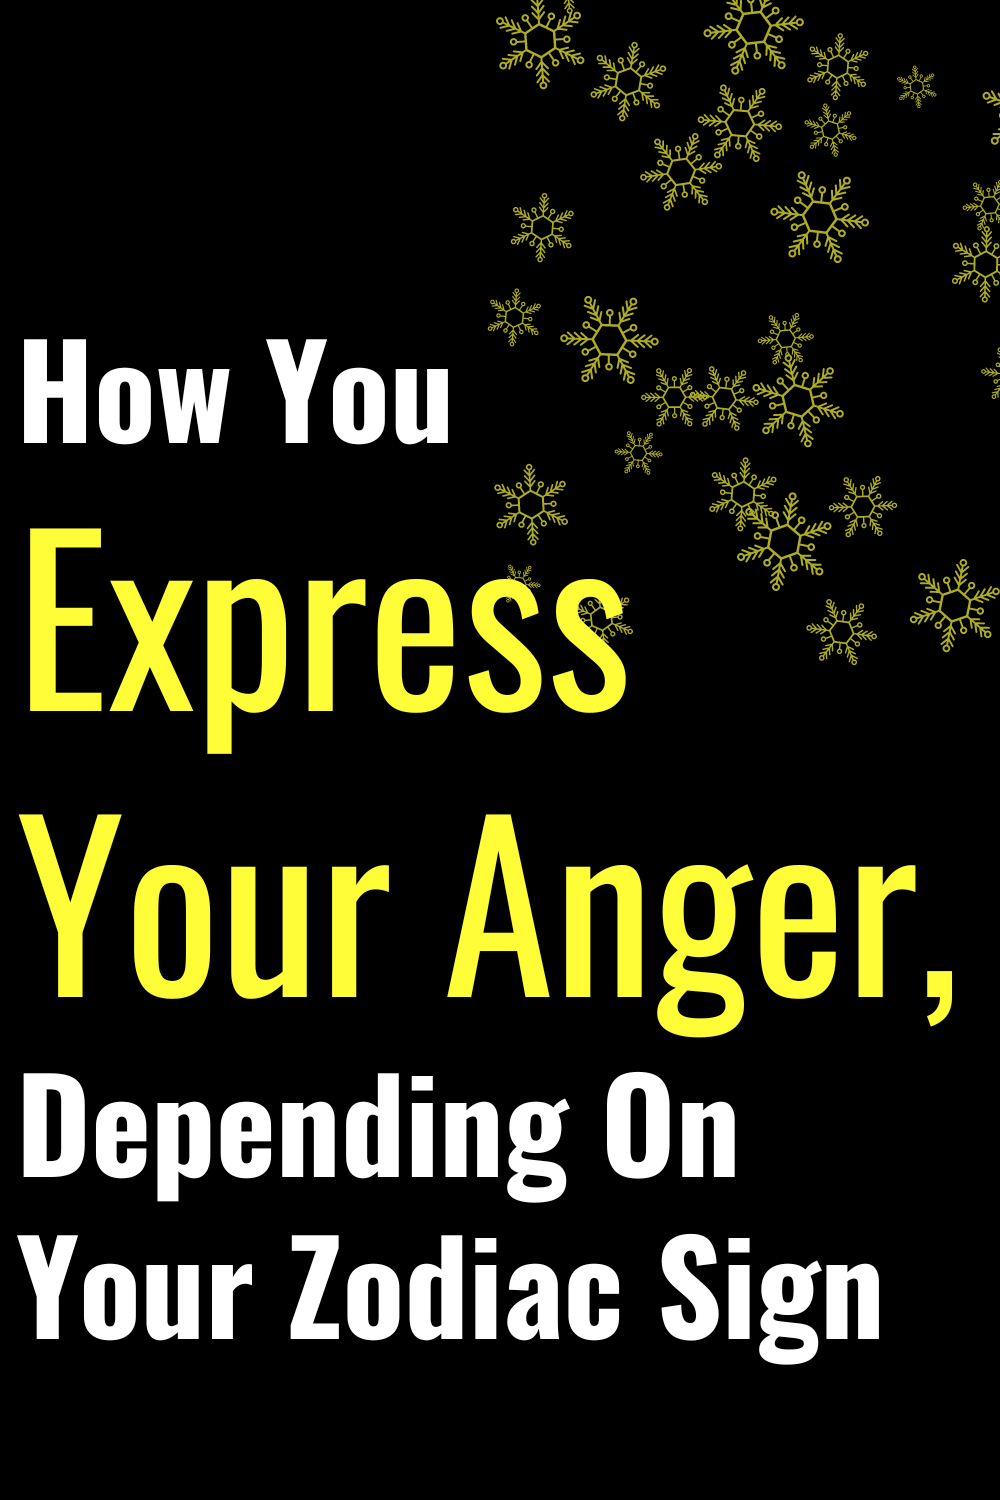 How You Express Your Anger, Depending On Your Zodiac Sign